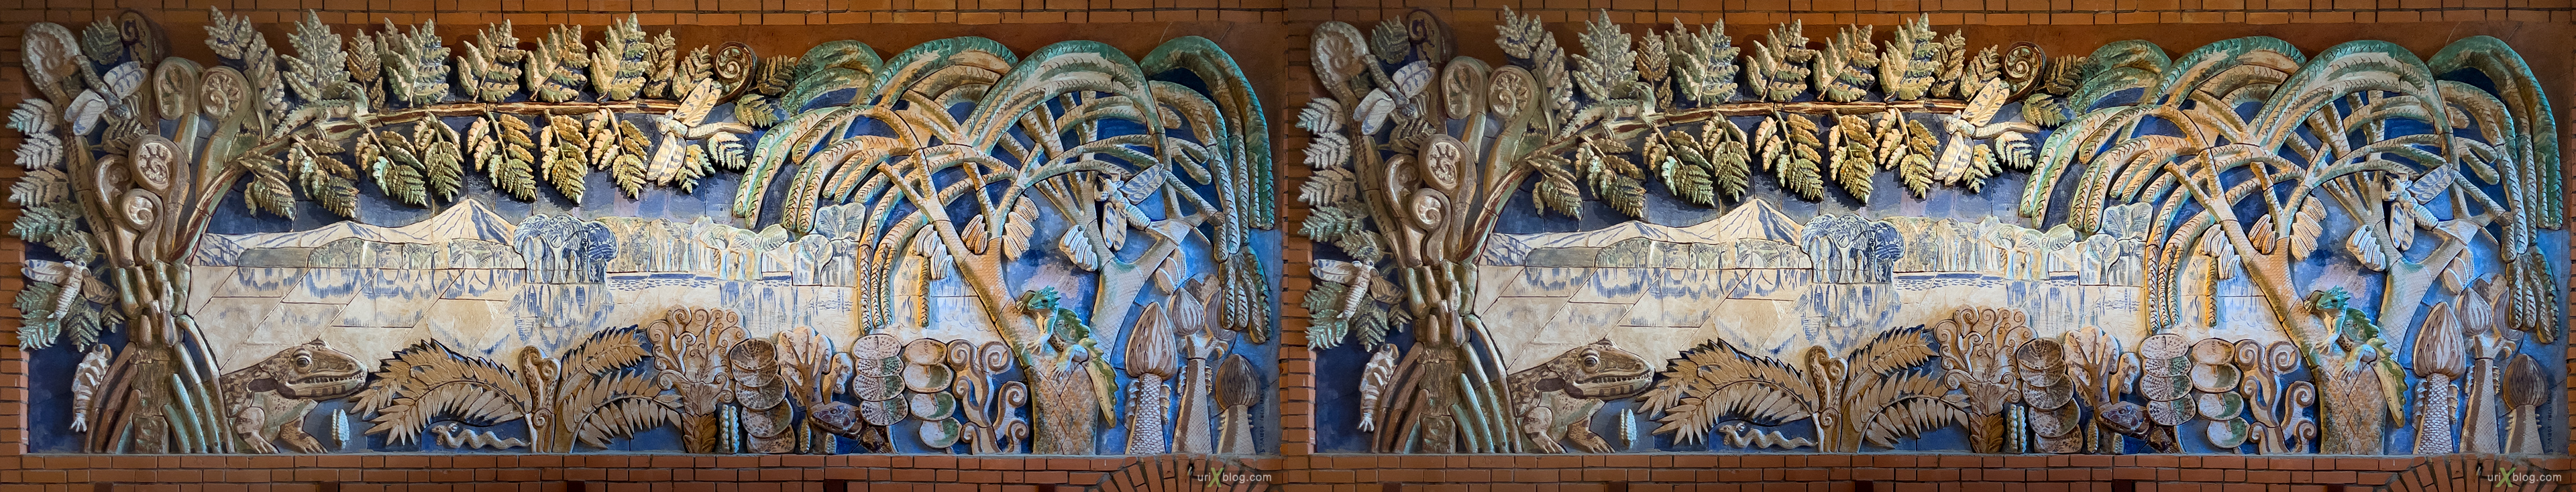 high relief, paleontology, soviet, paleontological museum, museum, Moscow, Russia, 3D, stereo pair, cross-eyed, crossview, cross view stereo pair, stereoscopic, panorama